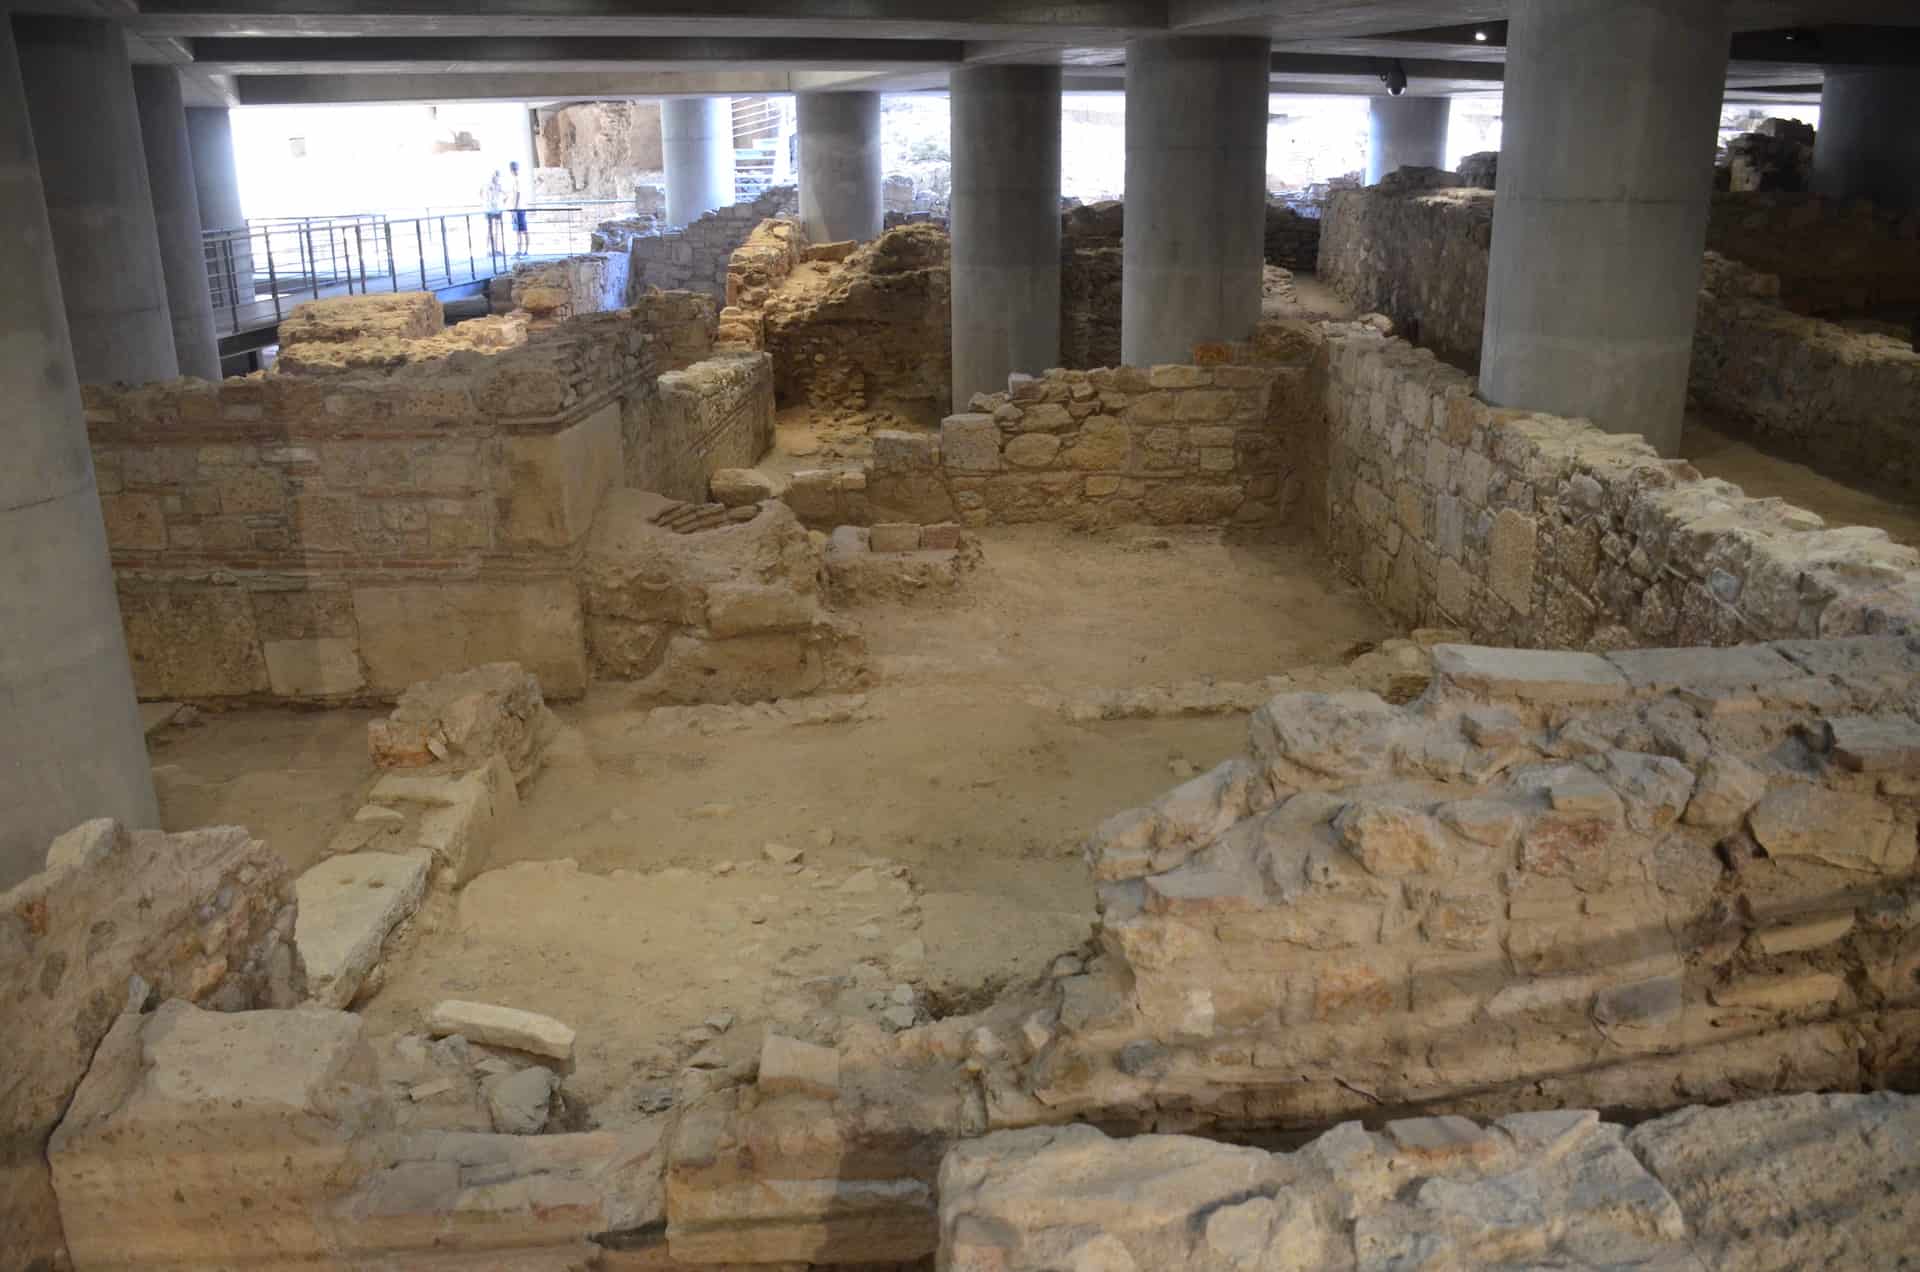 Building E in the archaeological site at the Acropolis Museum in Athens, Greece